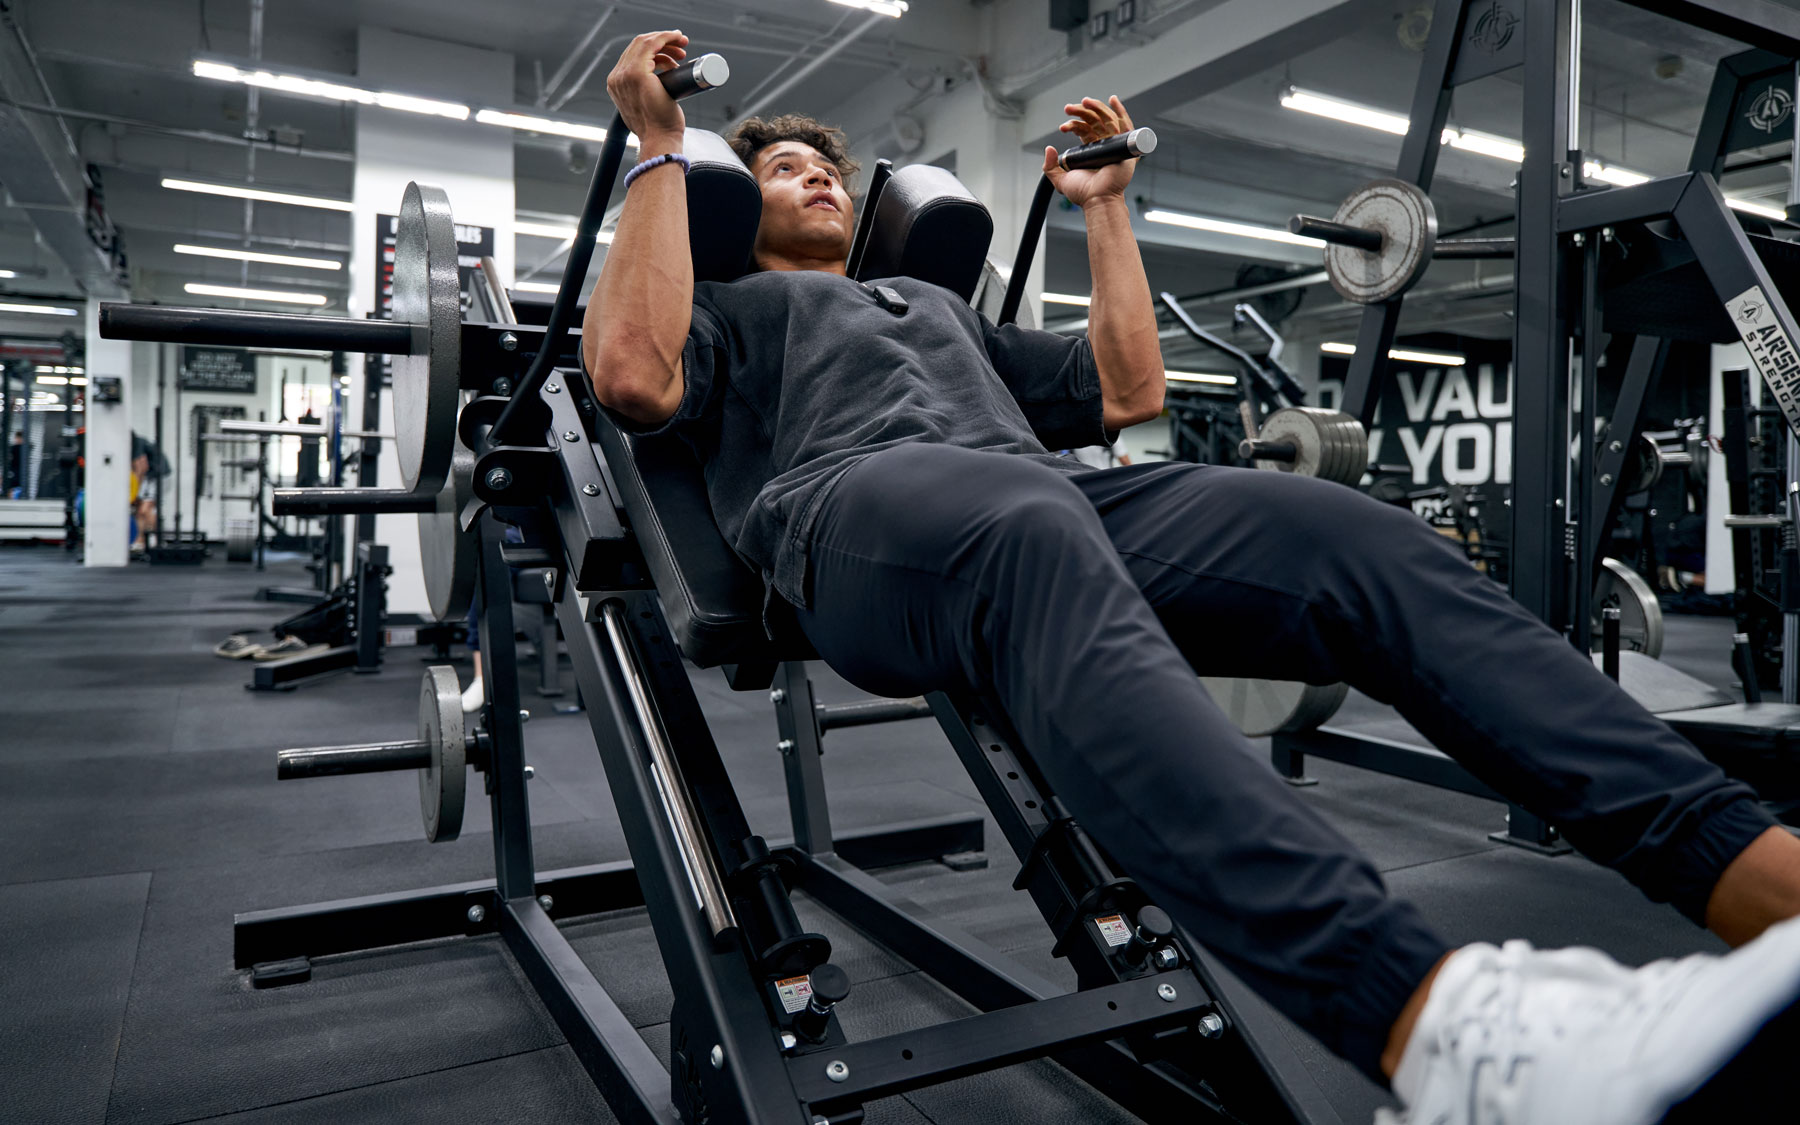 The Plate Loaded Hack Squat for Maximizing Your Leg Day